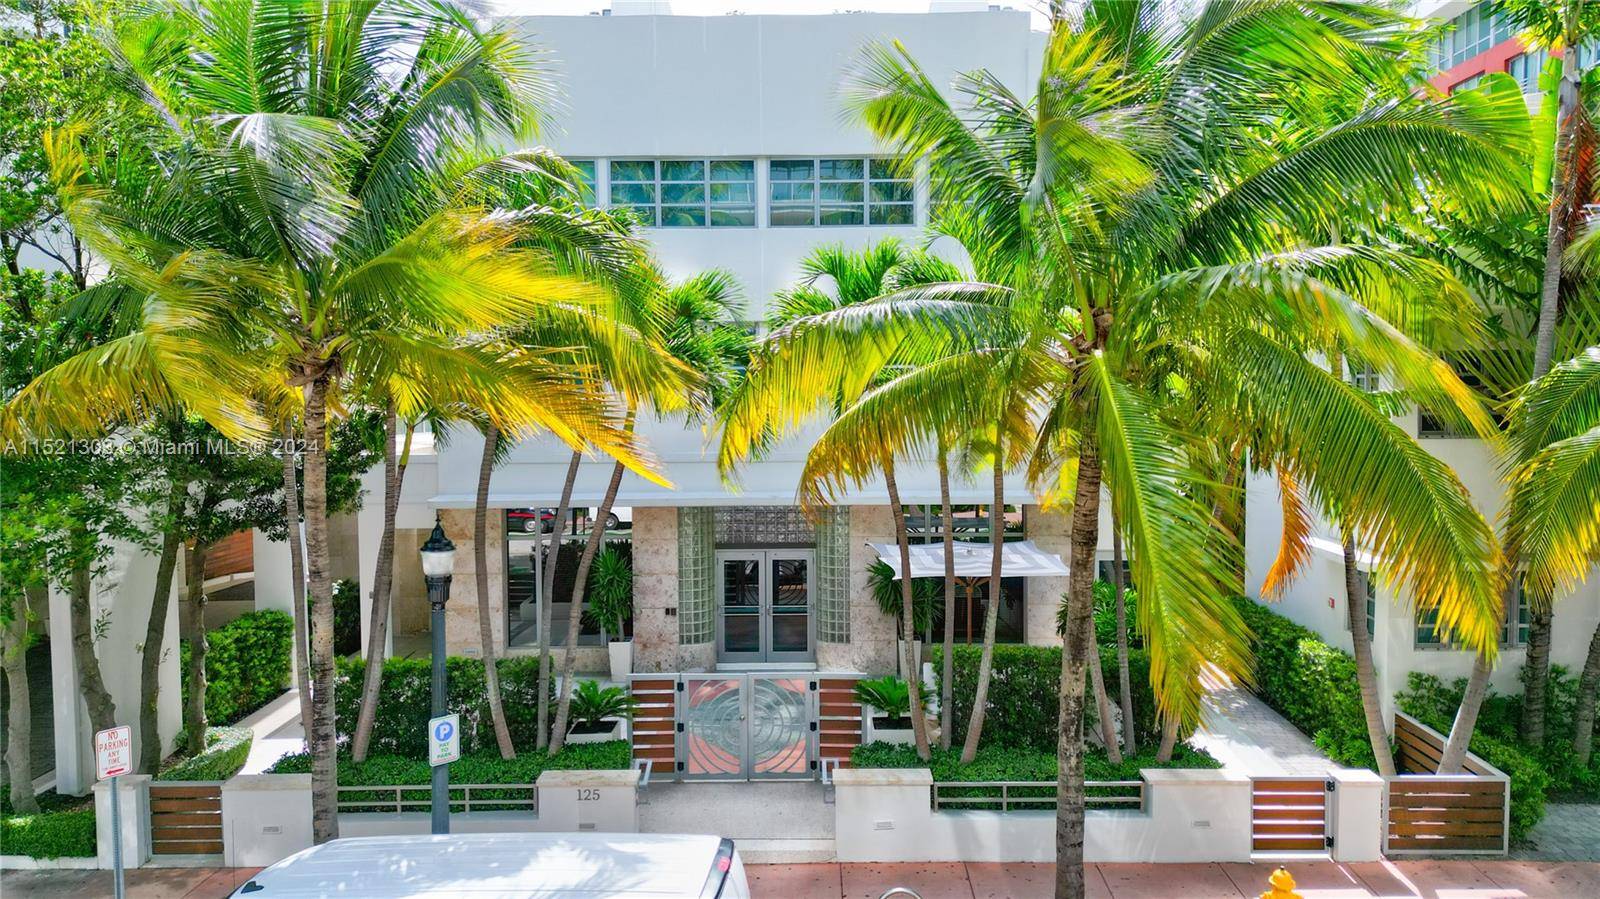 Luxury 2 Story Townhouse style condominium unit located at Ocean House at South Beach.